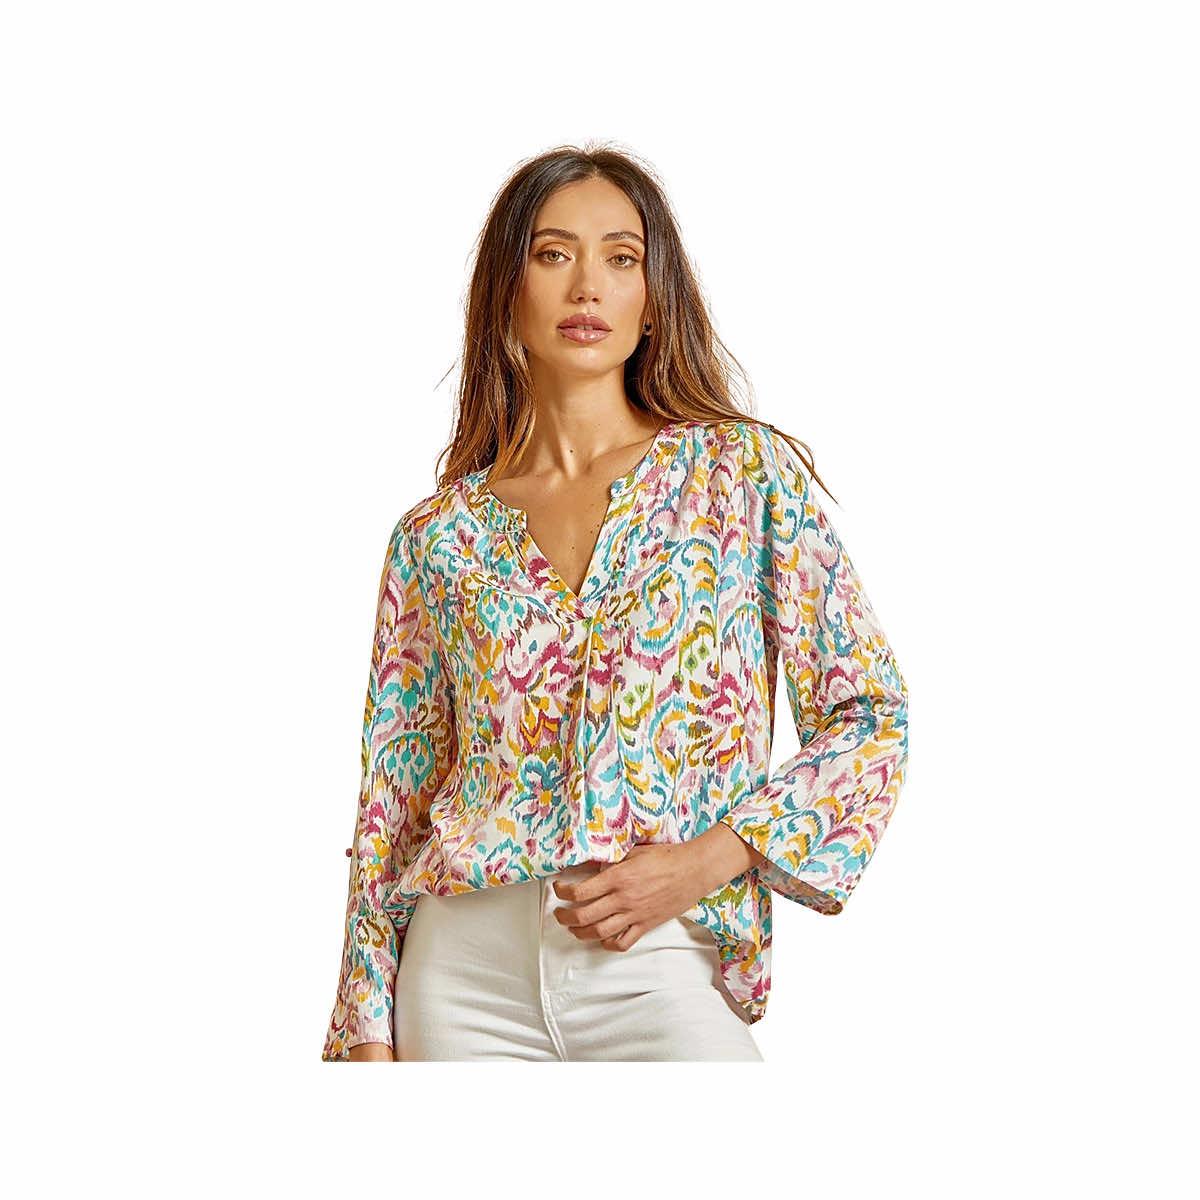  Women's Long Sleeve Floral Top